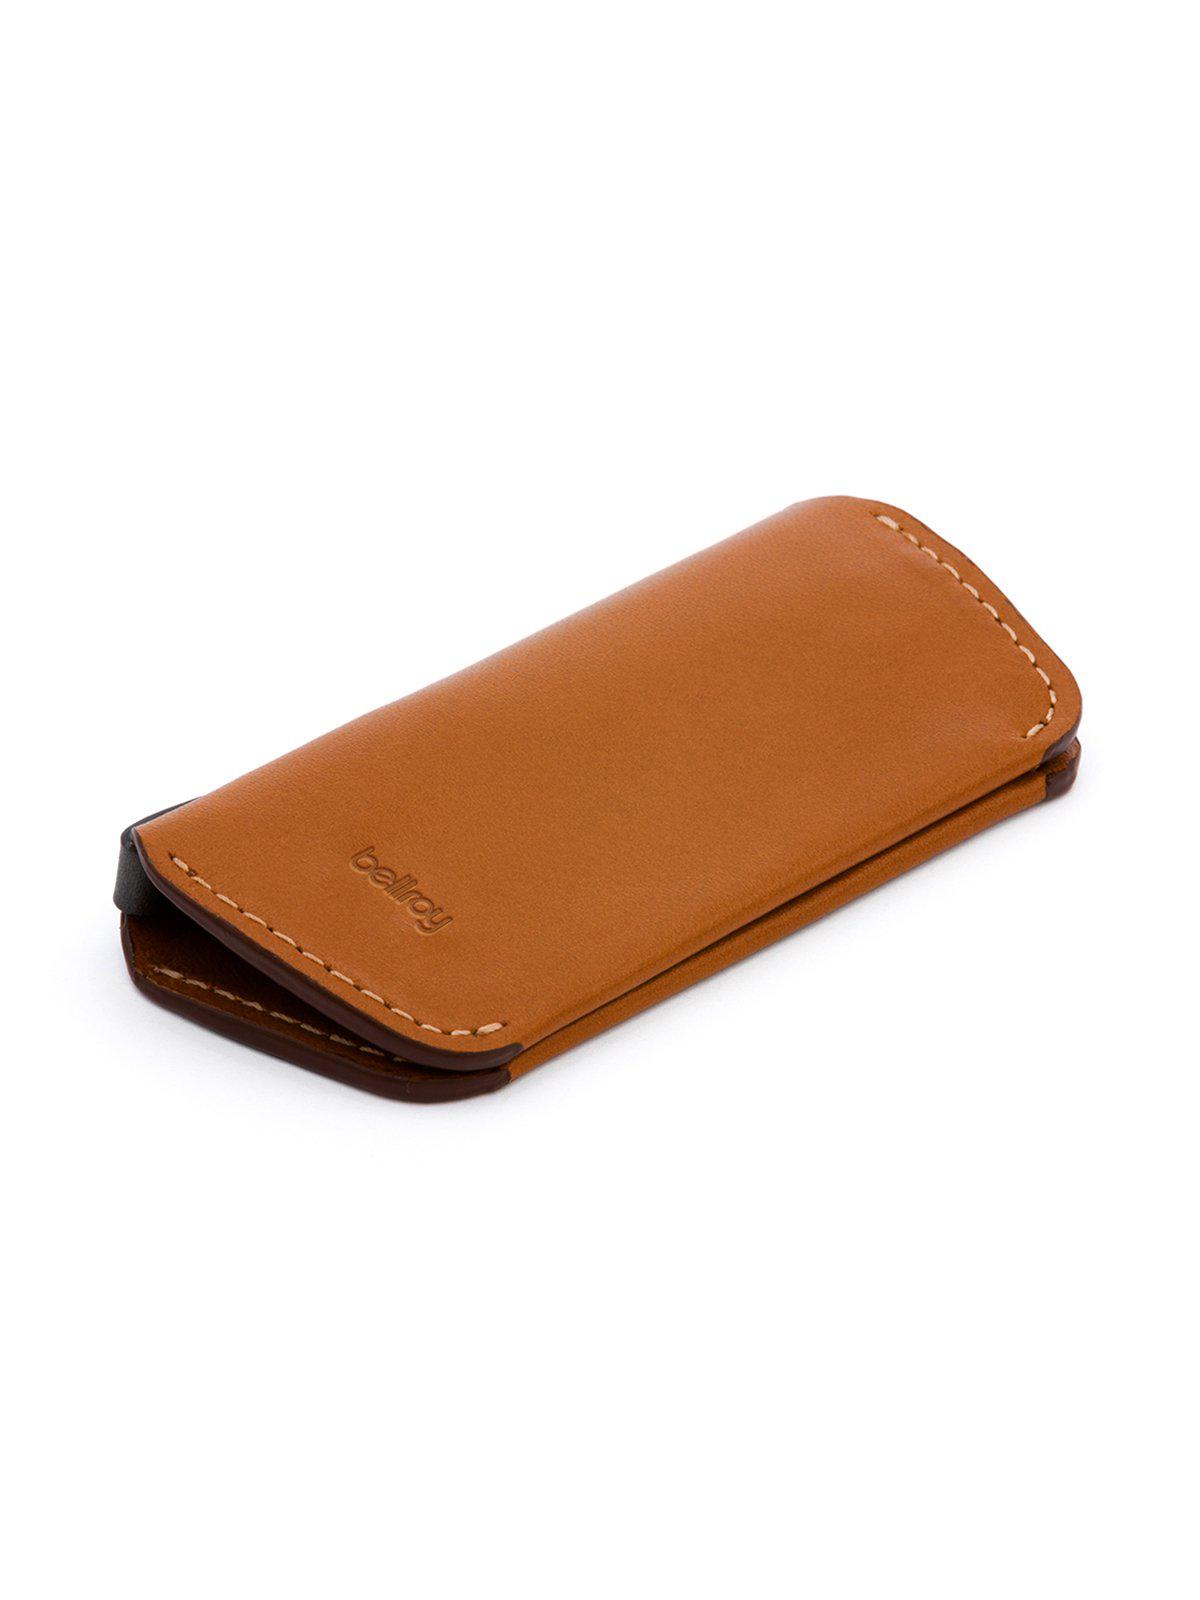 Bellroy Key Cover Plus Caramel - MORE by Morello Indonesia